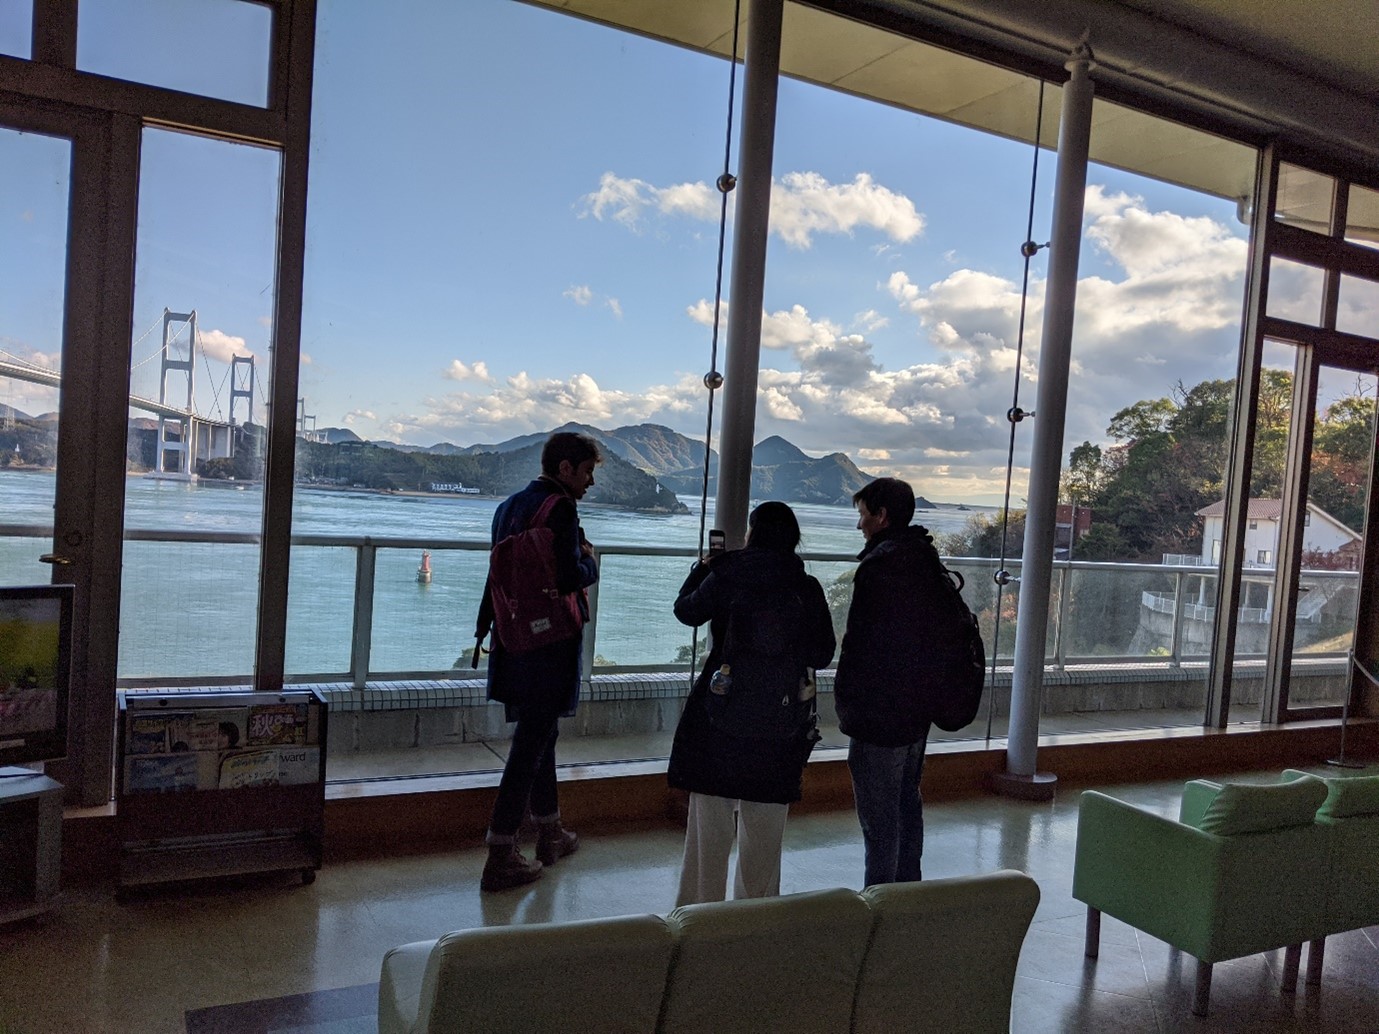 A view of the world's longest suspension bridge structure in Shikoku through windows